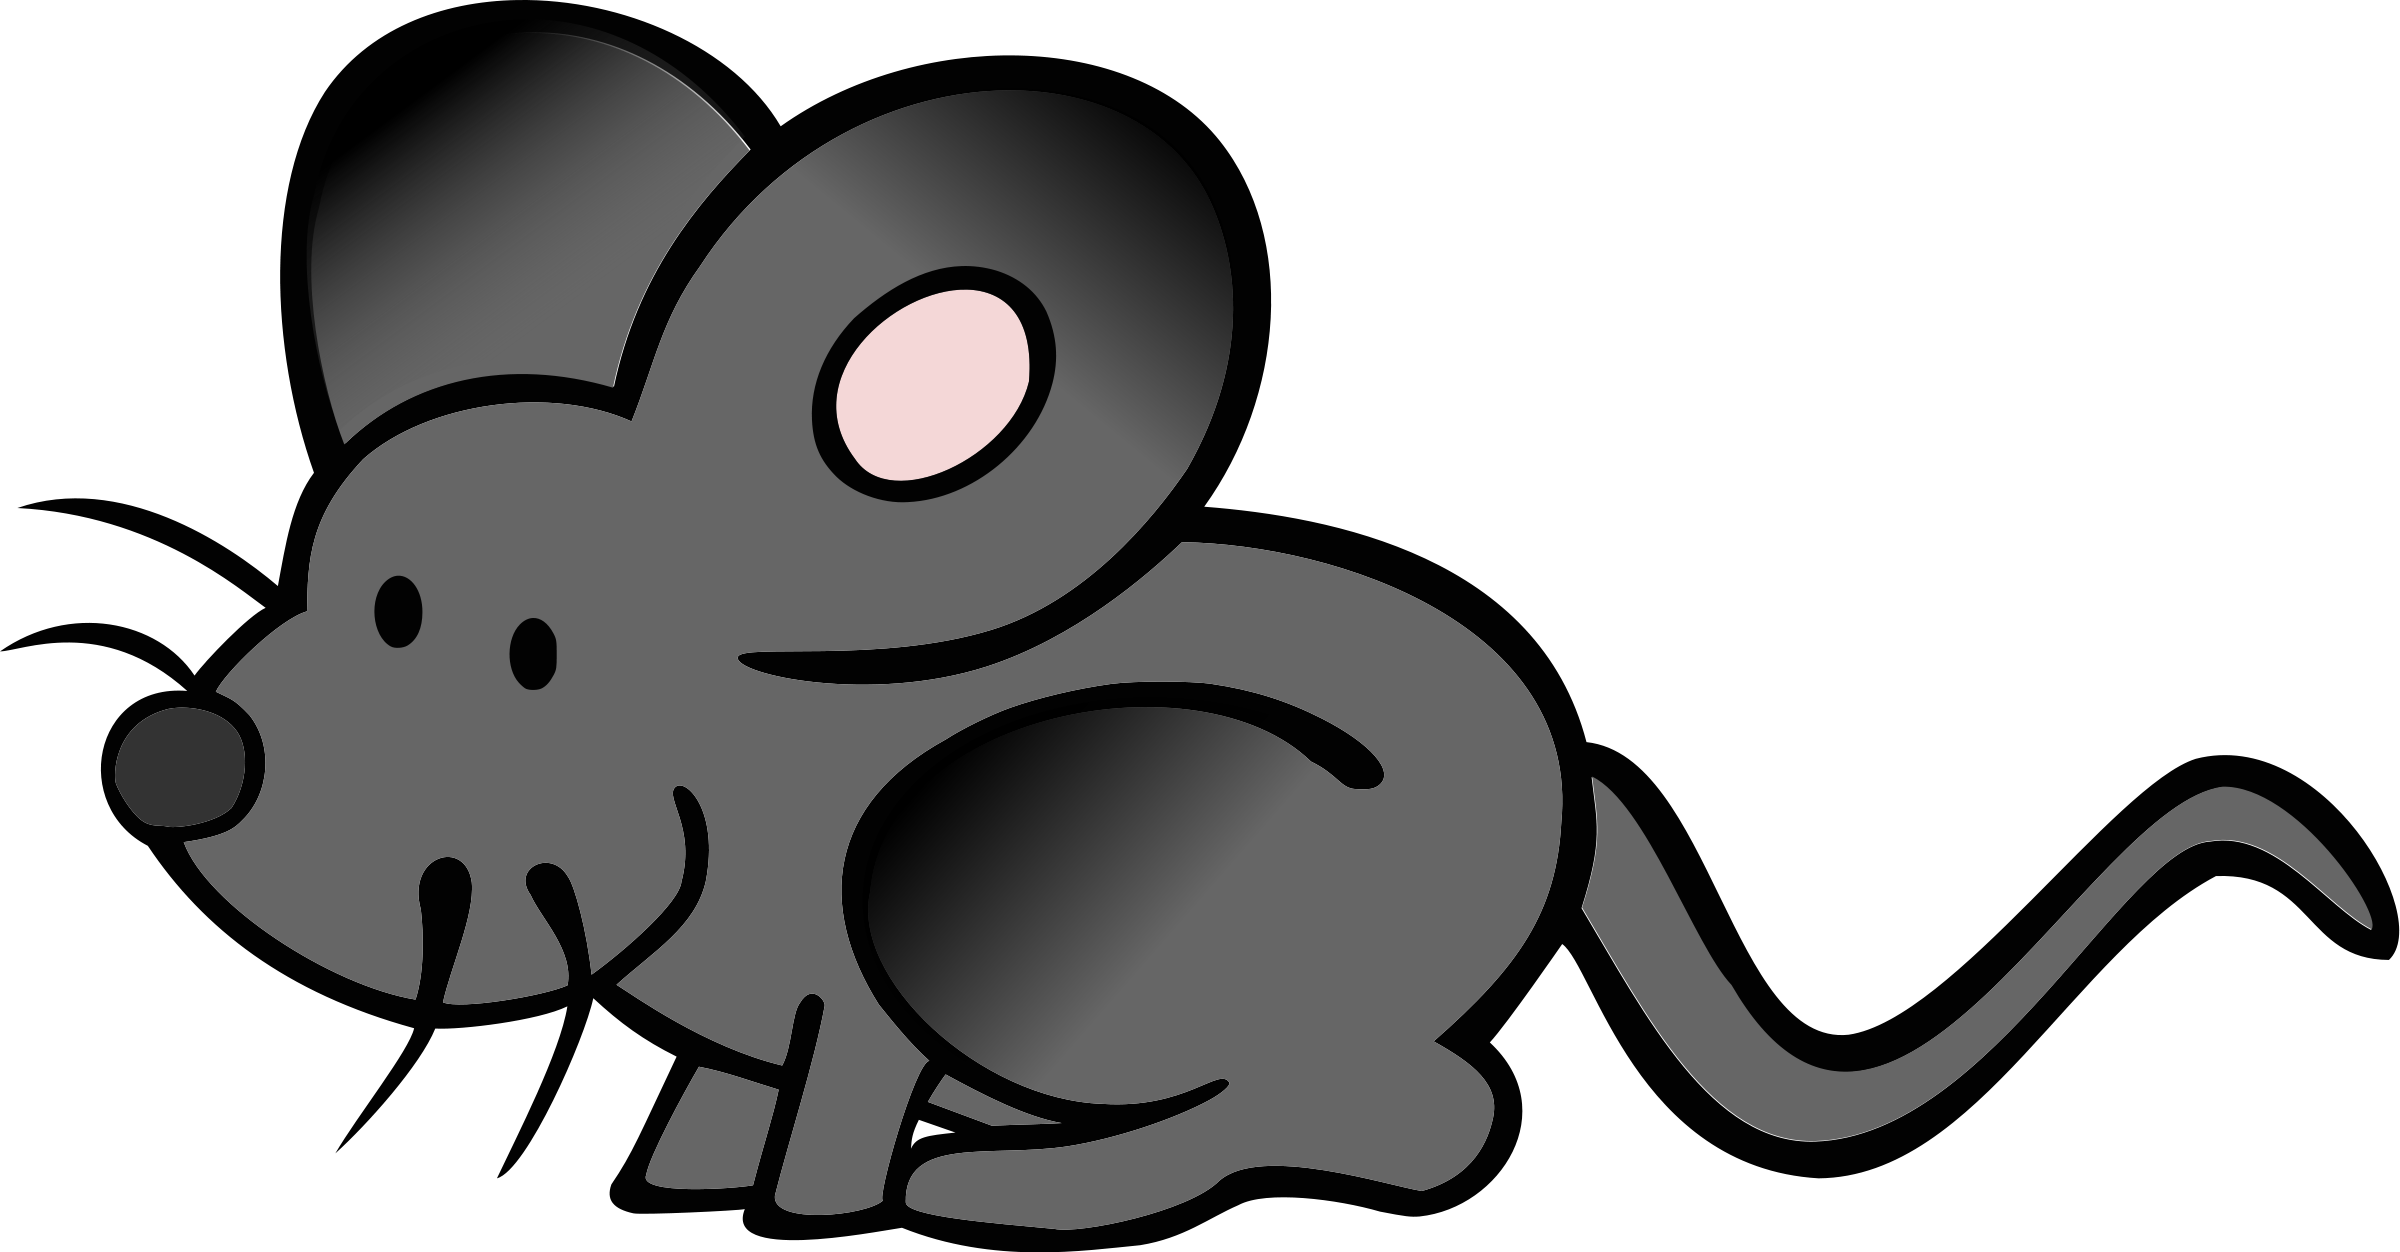 Cartoon Image Of Mouse - Clipart library